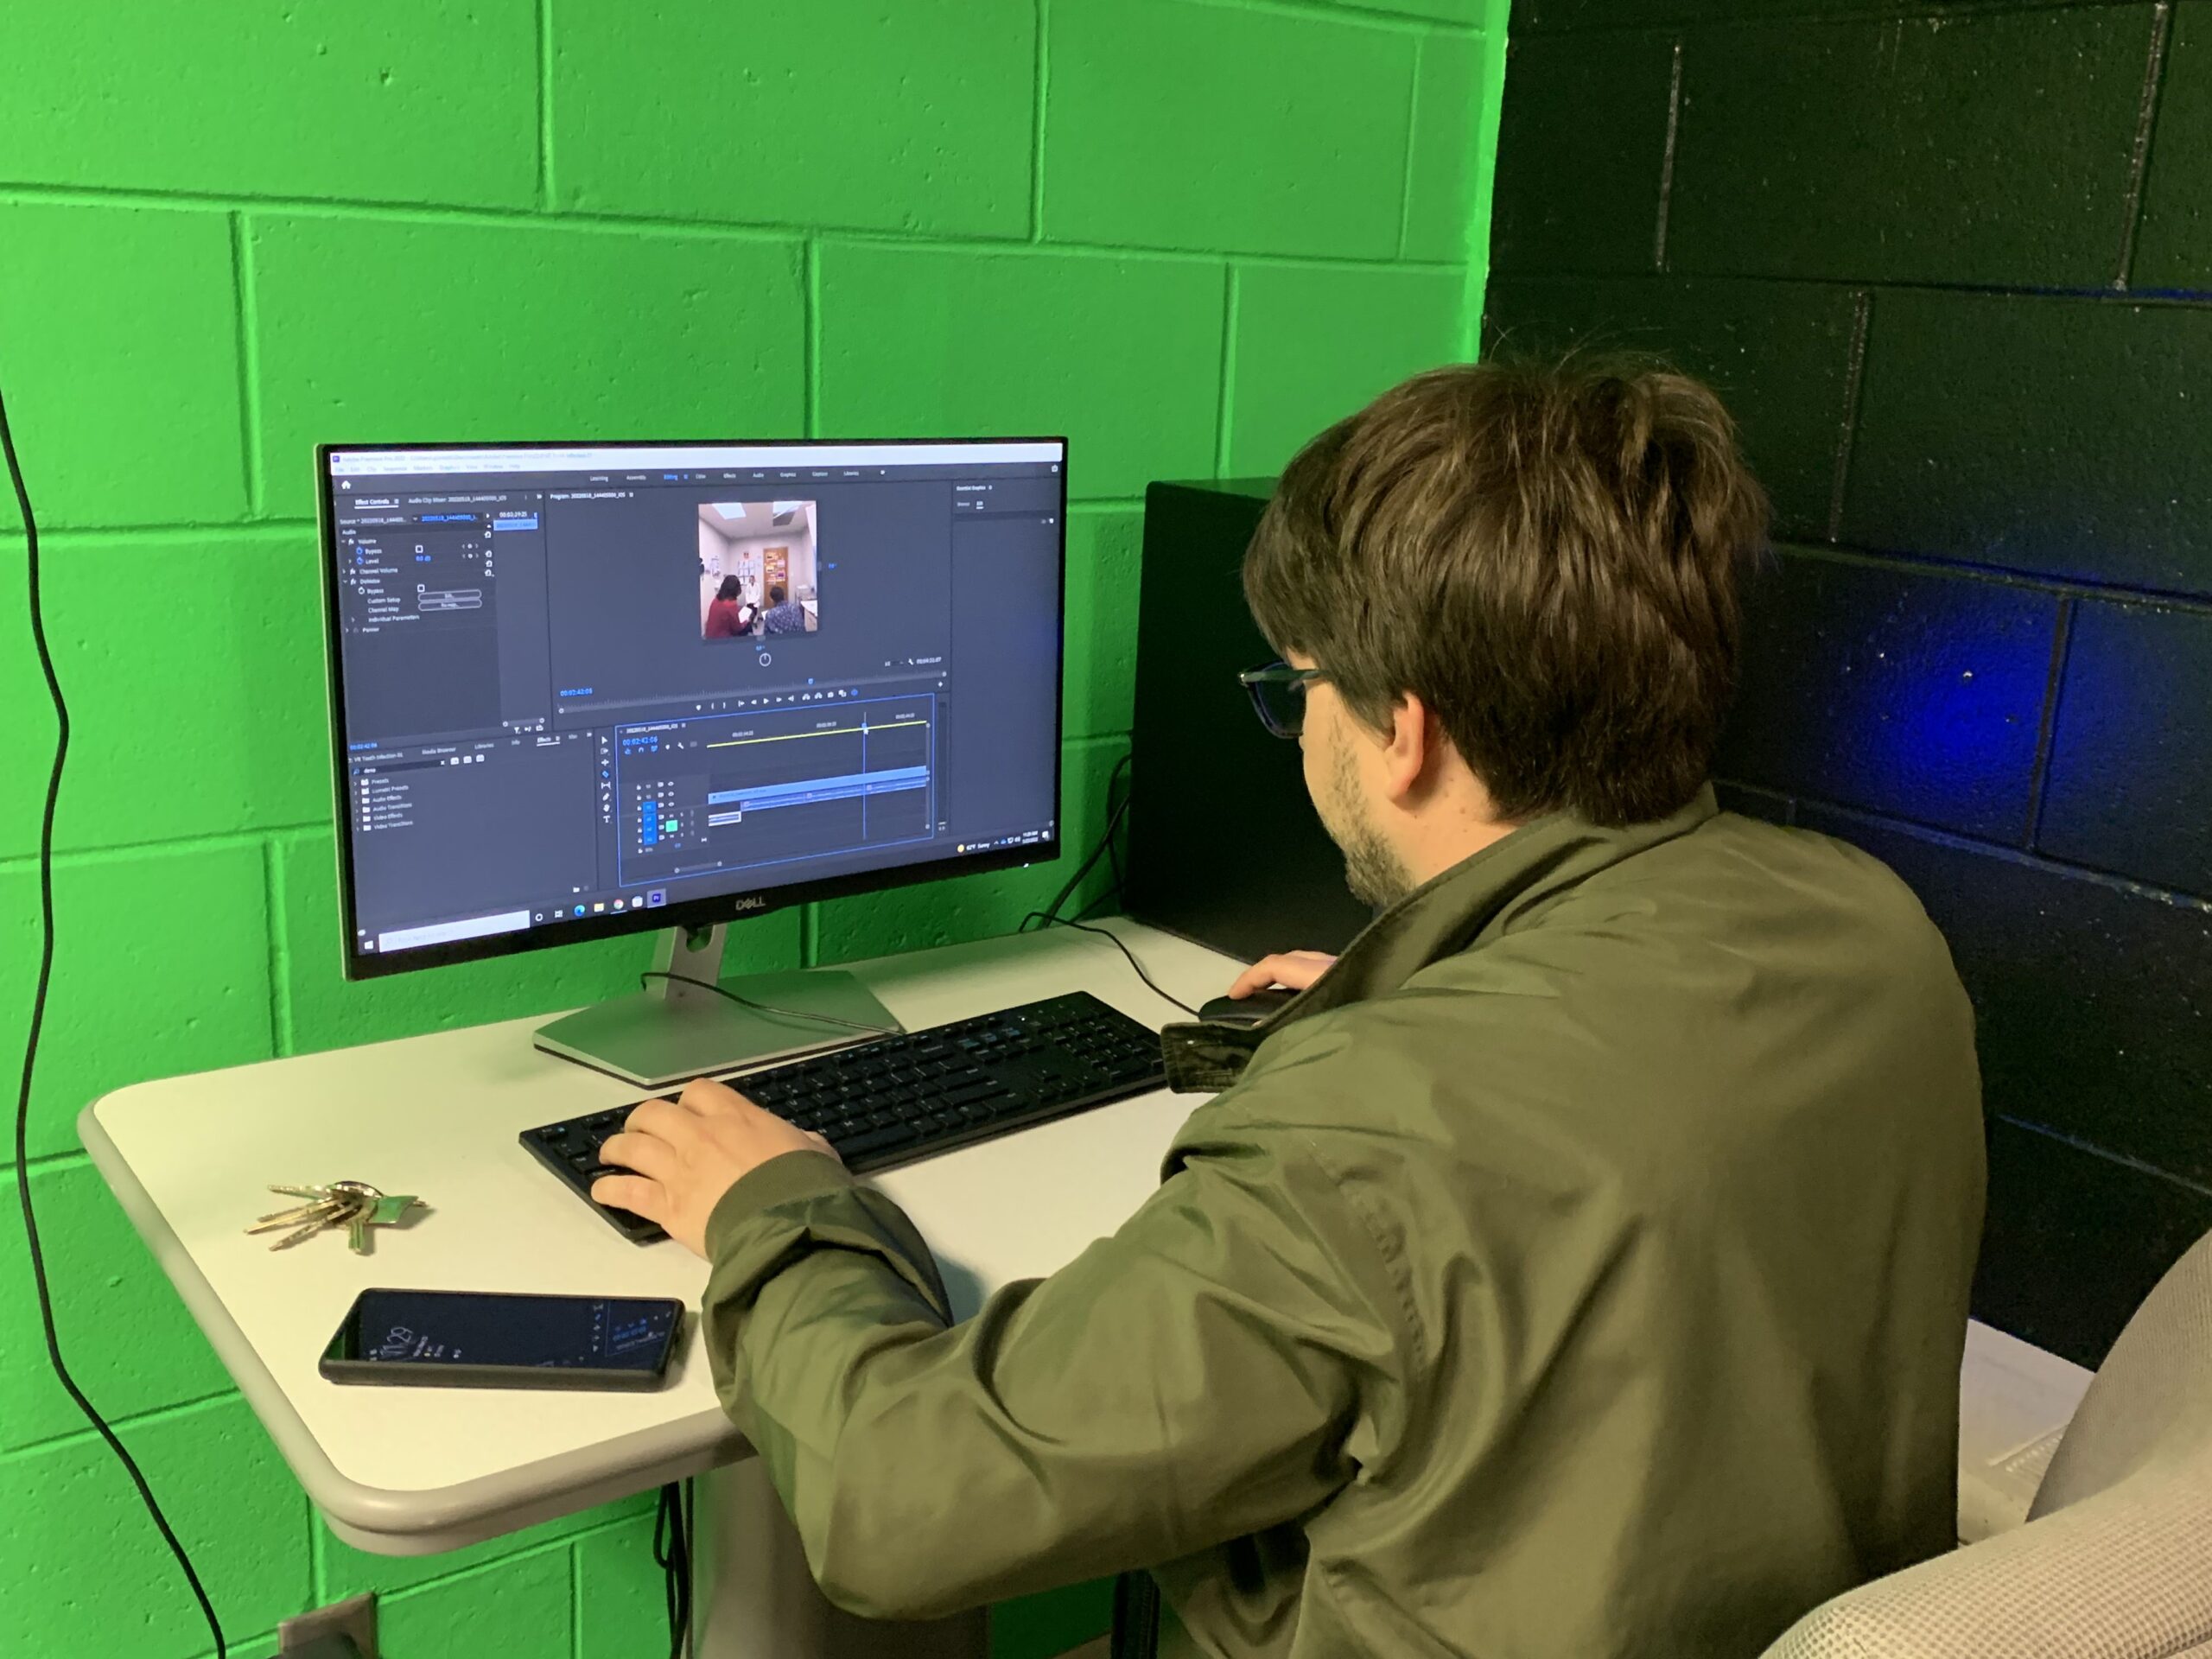 Picture 3 - Editing the VR scenarios in Adobe Premiere Pro - man working at computer